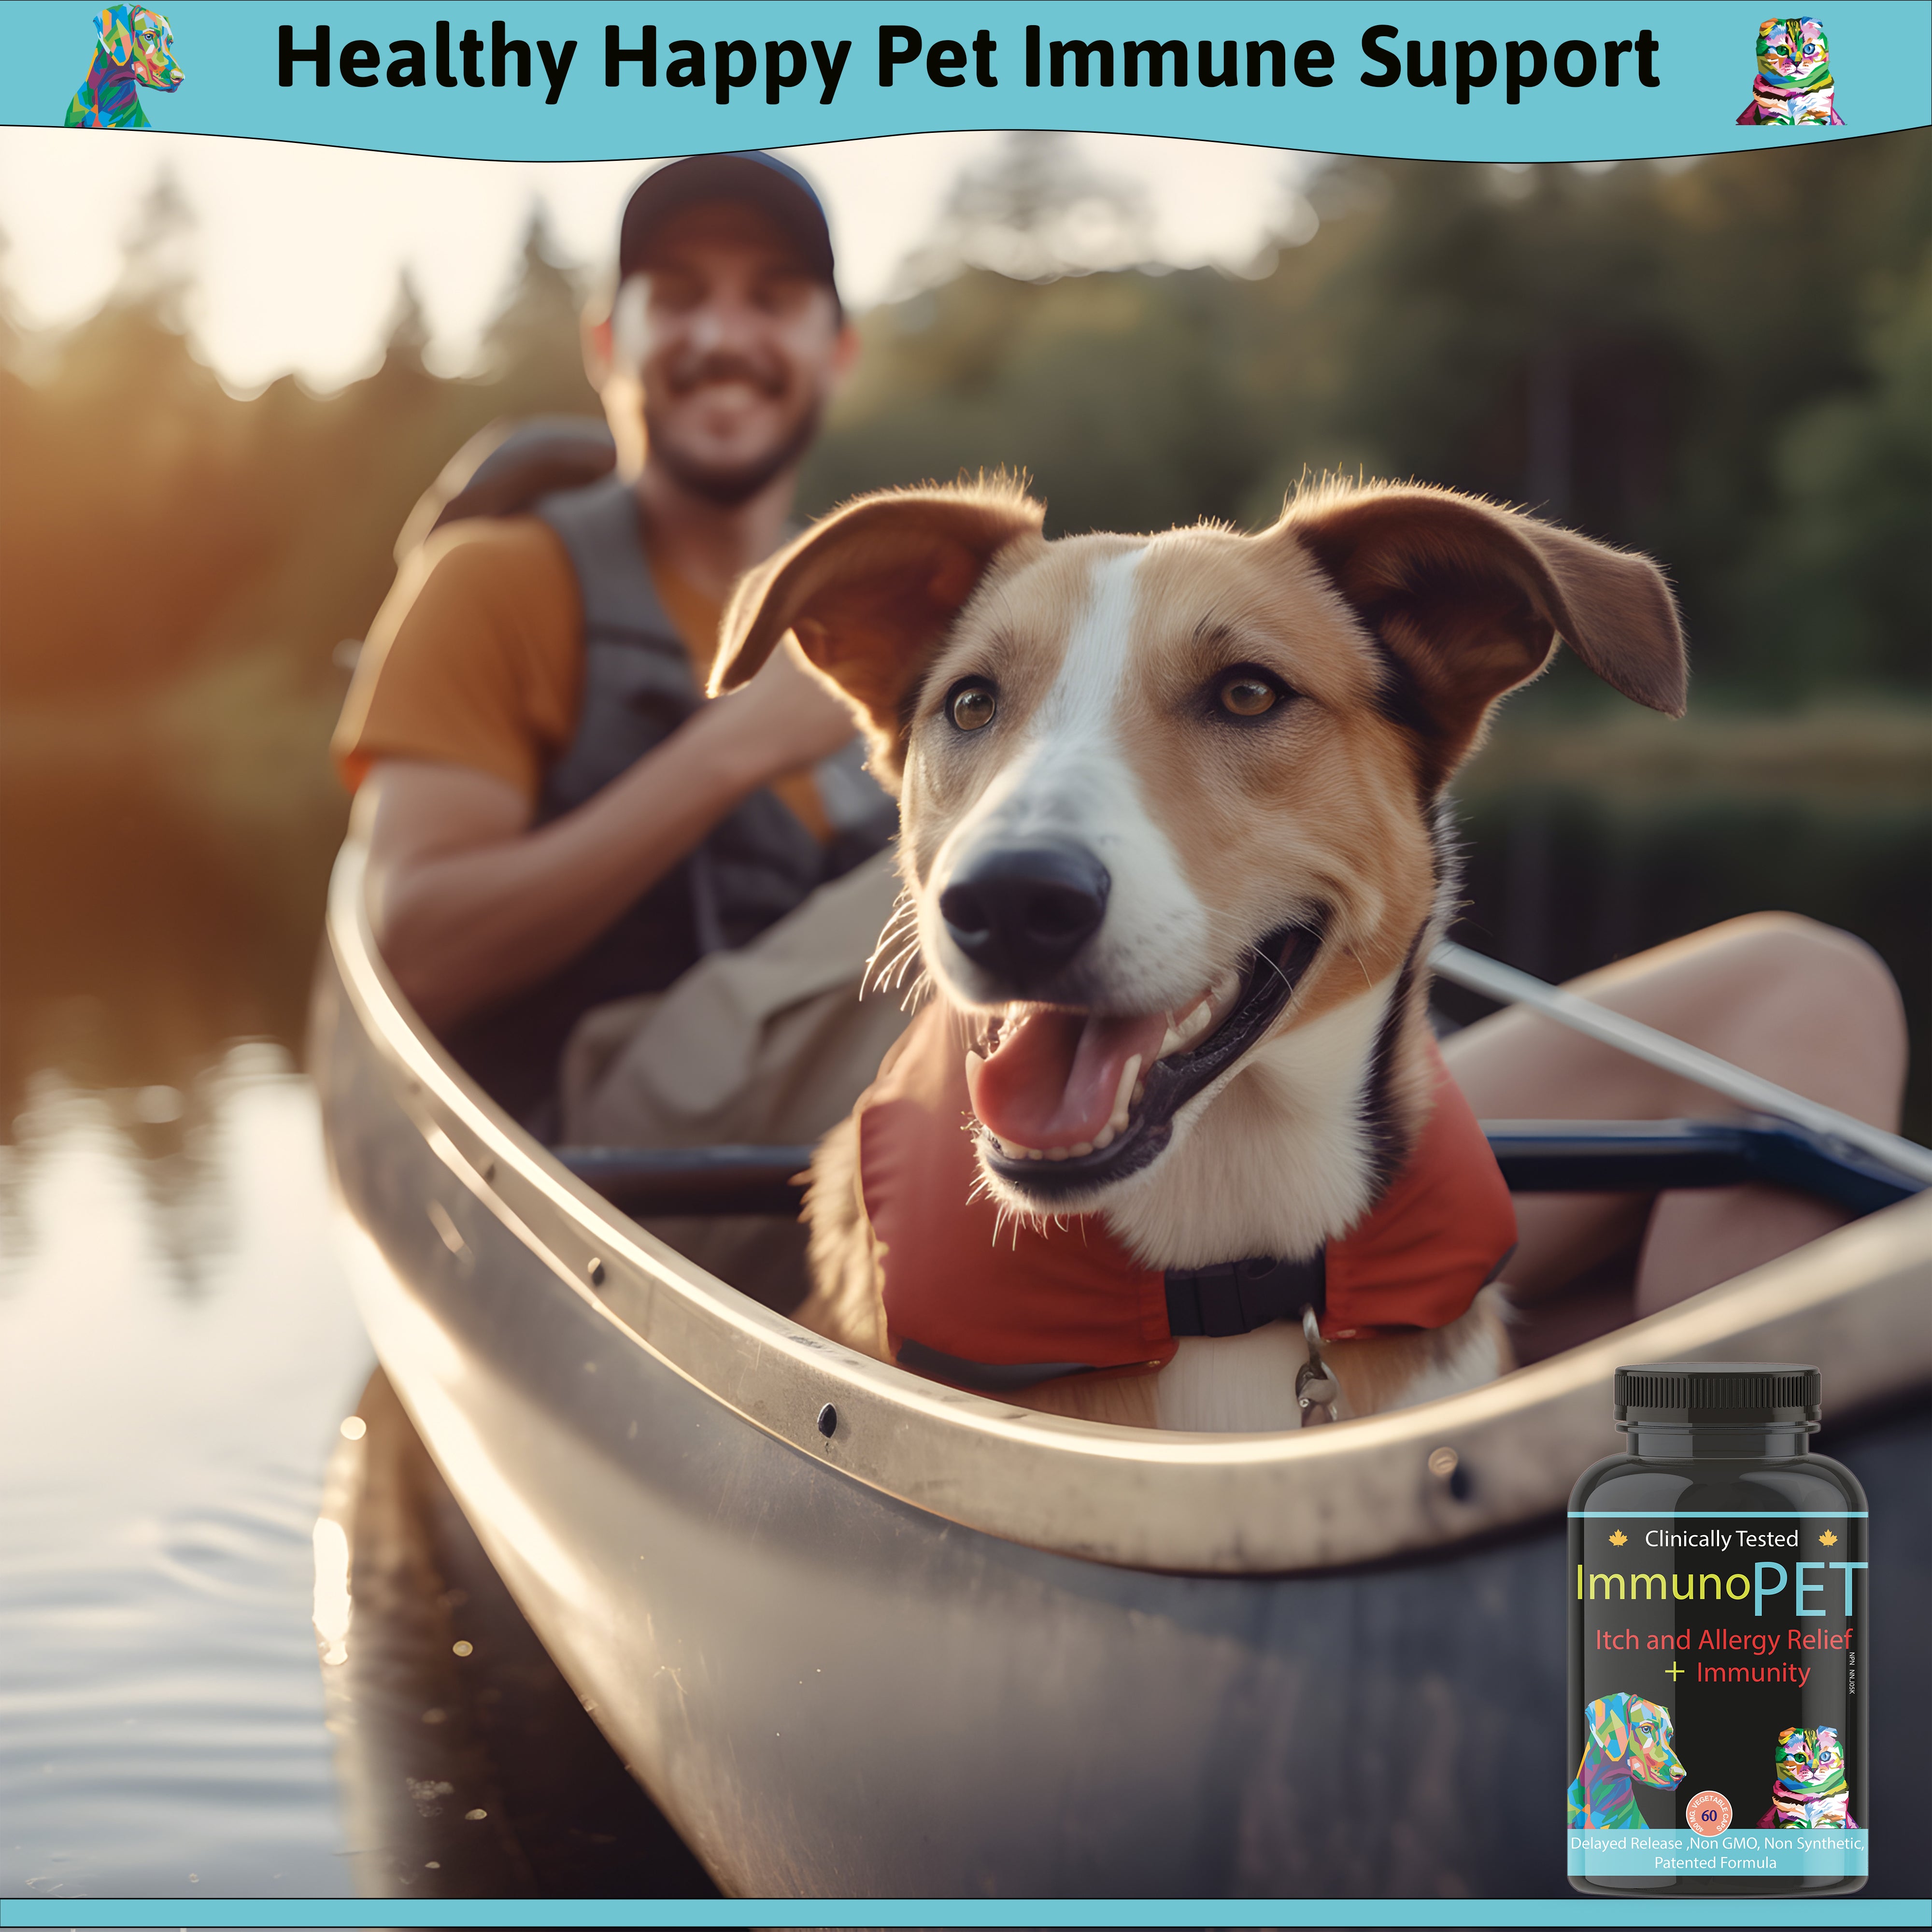 A man in a boat with his dog enjoying nature. Pet immunity, pet vitamins, hot spots and itchiness.